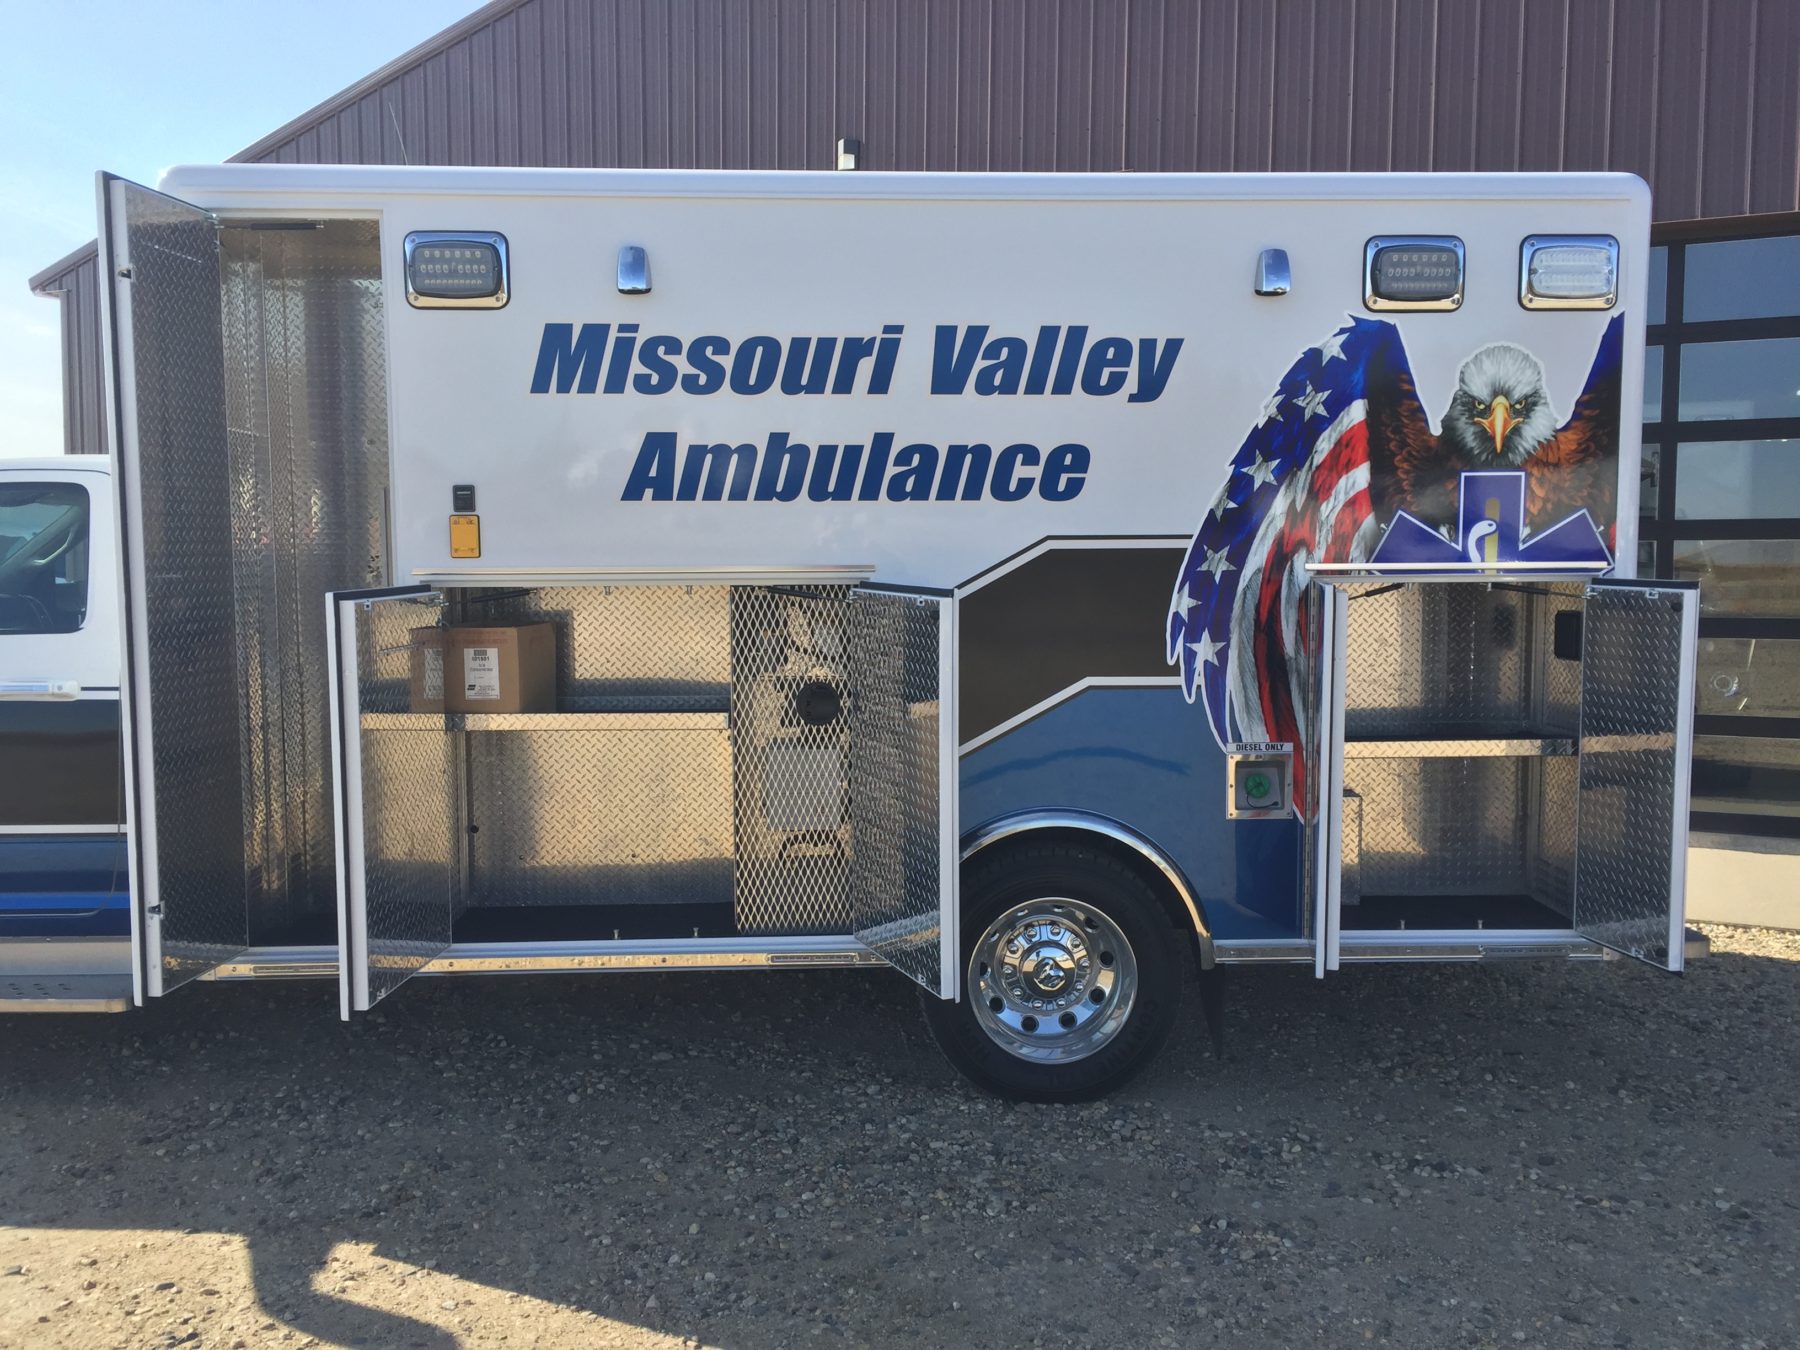 2019 Ram 4500 4x4 Heavy Duty Ambulance For Sale – Picture 6